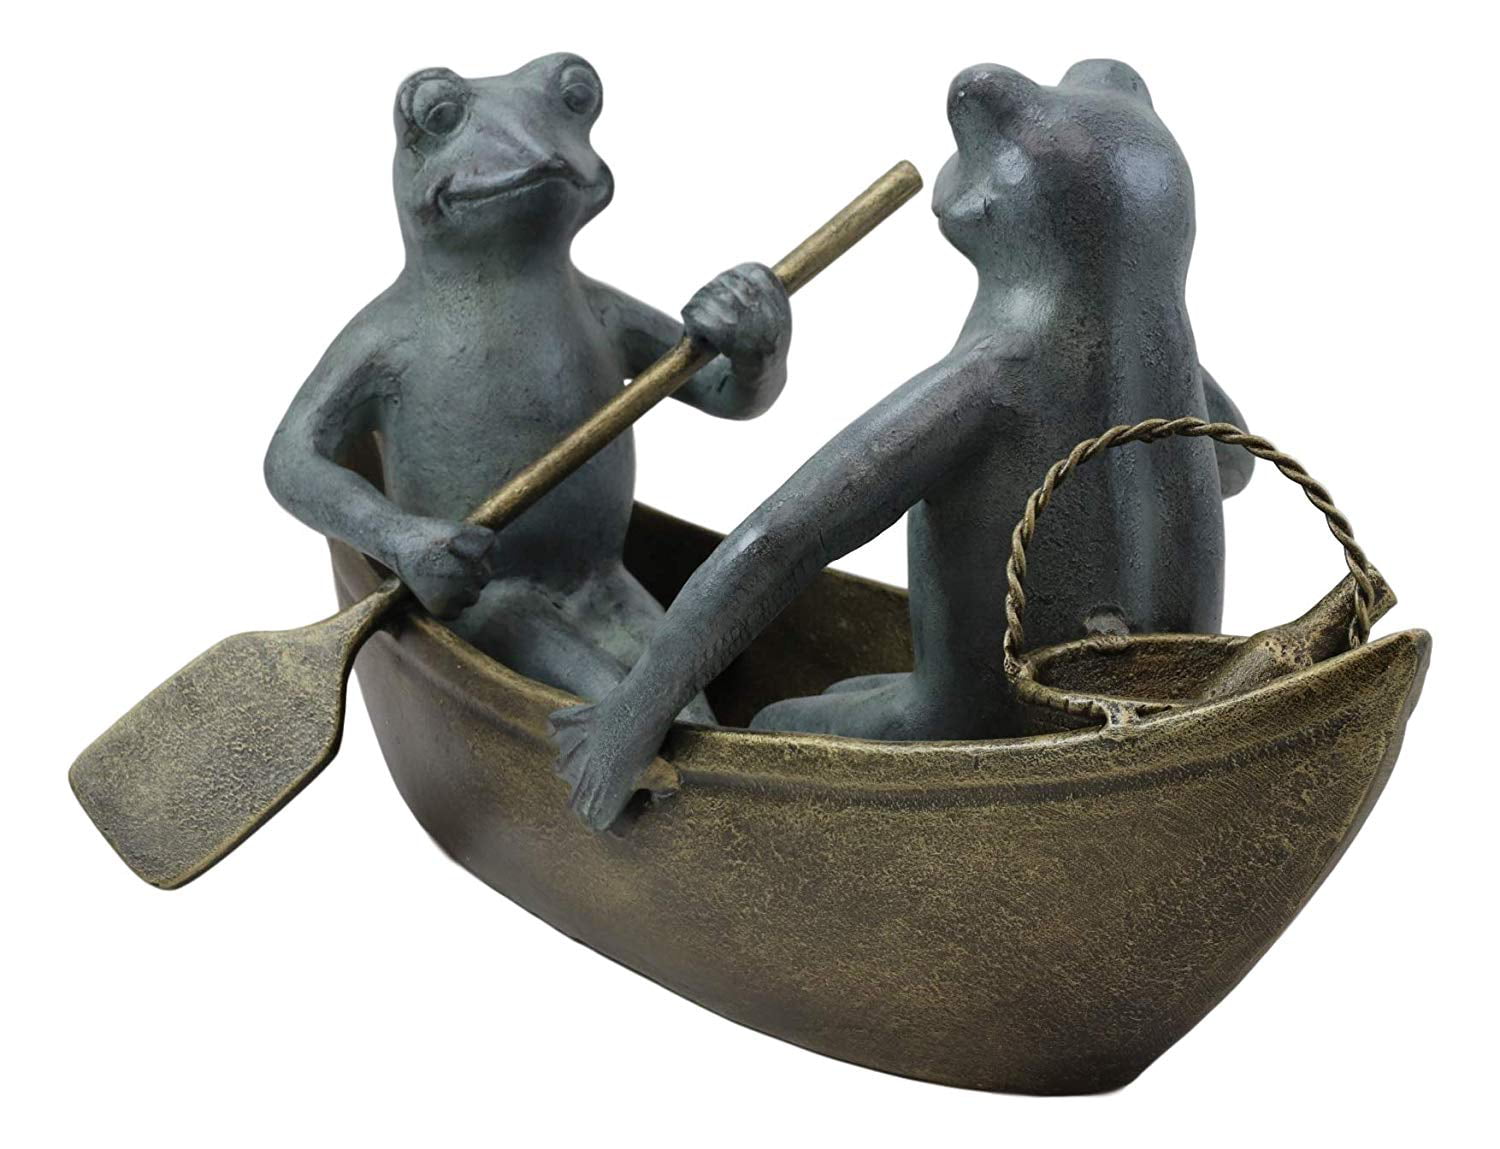 SPI Home Rowboat Picnic Frogs Wine Drinking Frog Garden Pond Sculpture Statue 